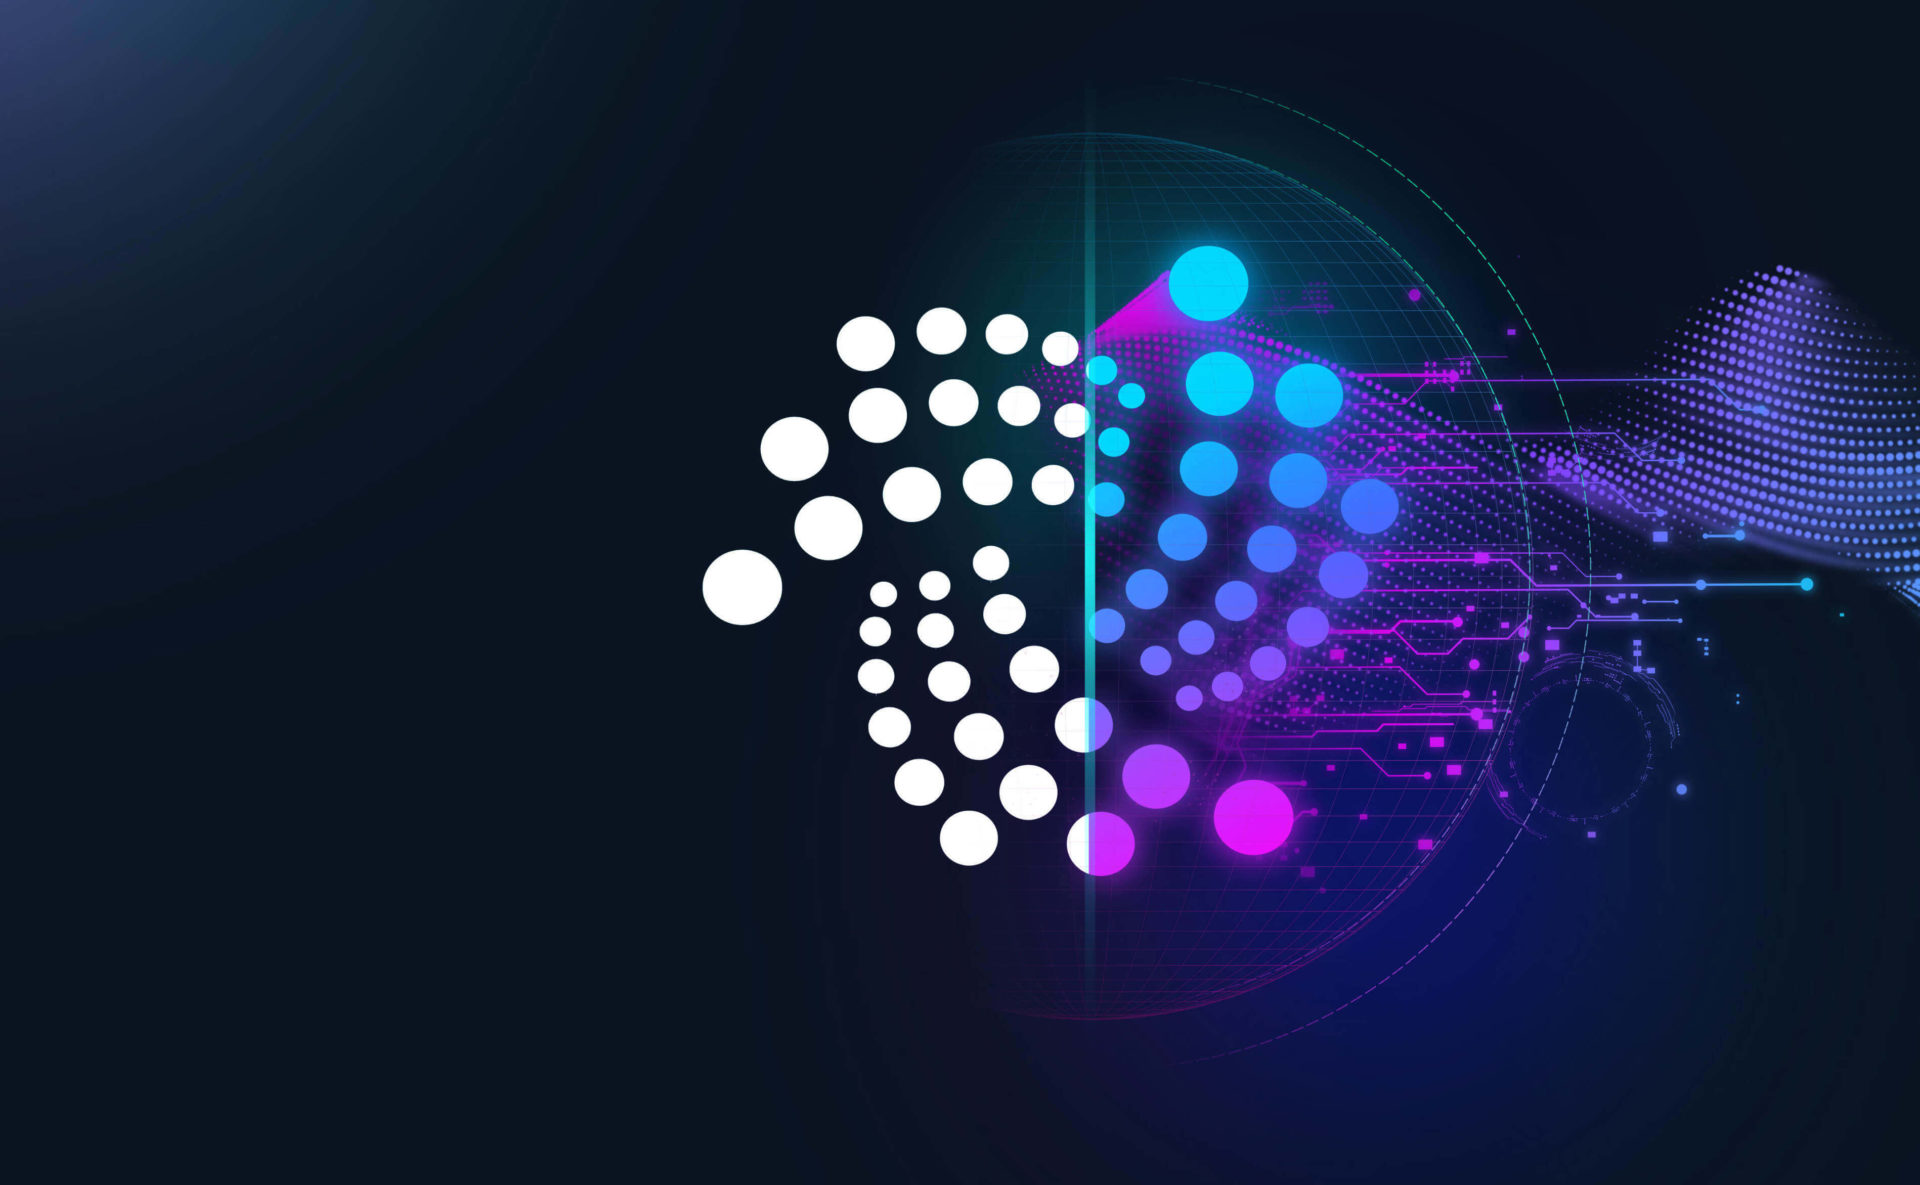 IOTA (MIOTA) Expands Industrial Partnerships with VW, Bosch and Fujistsu